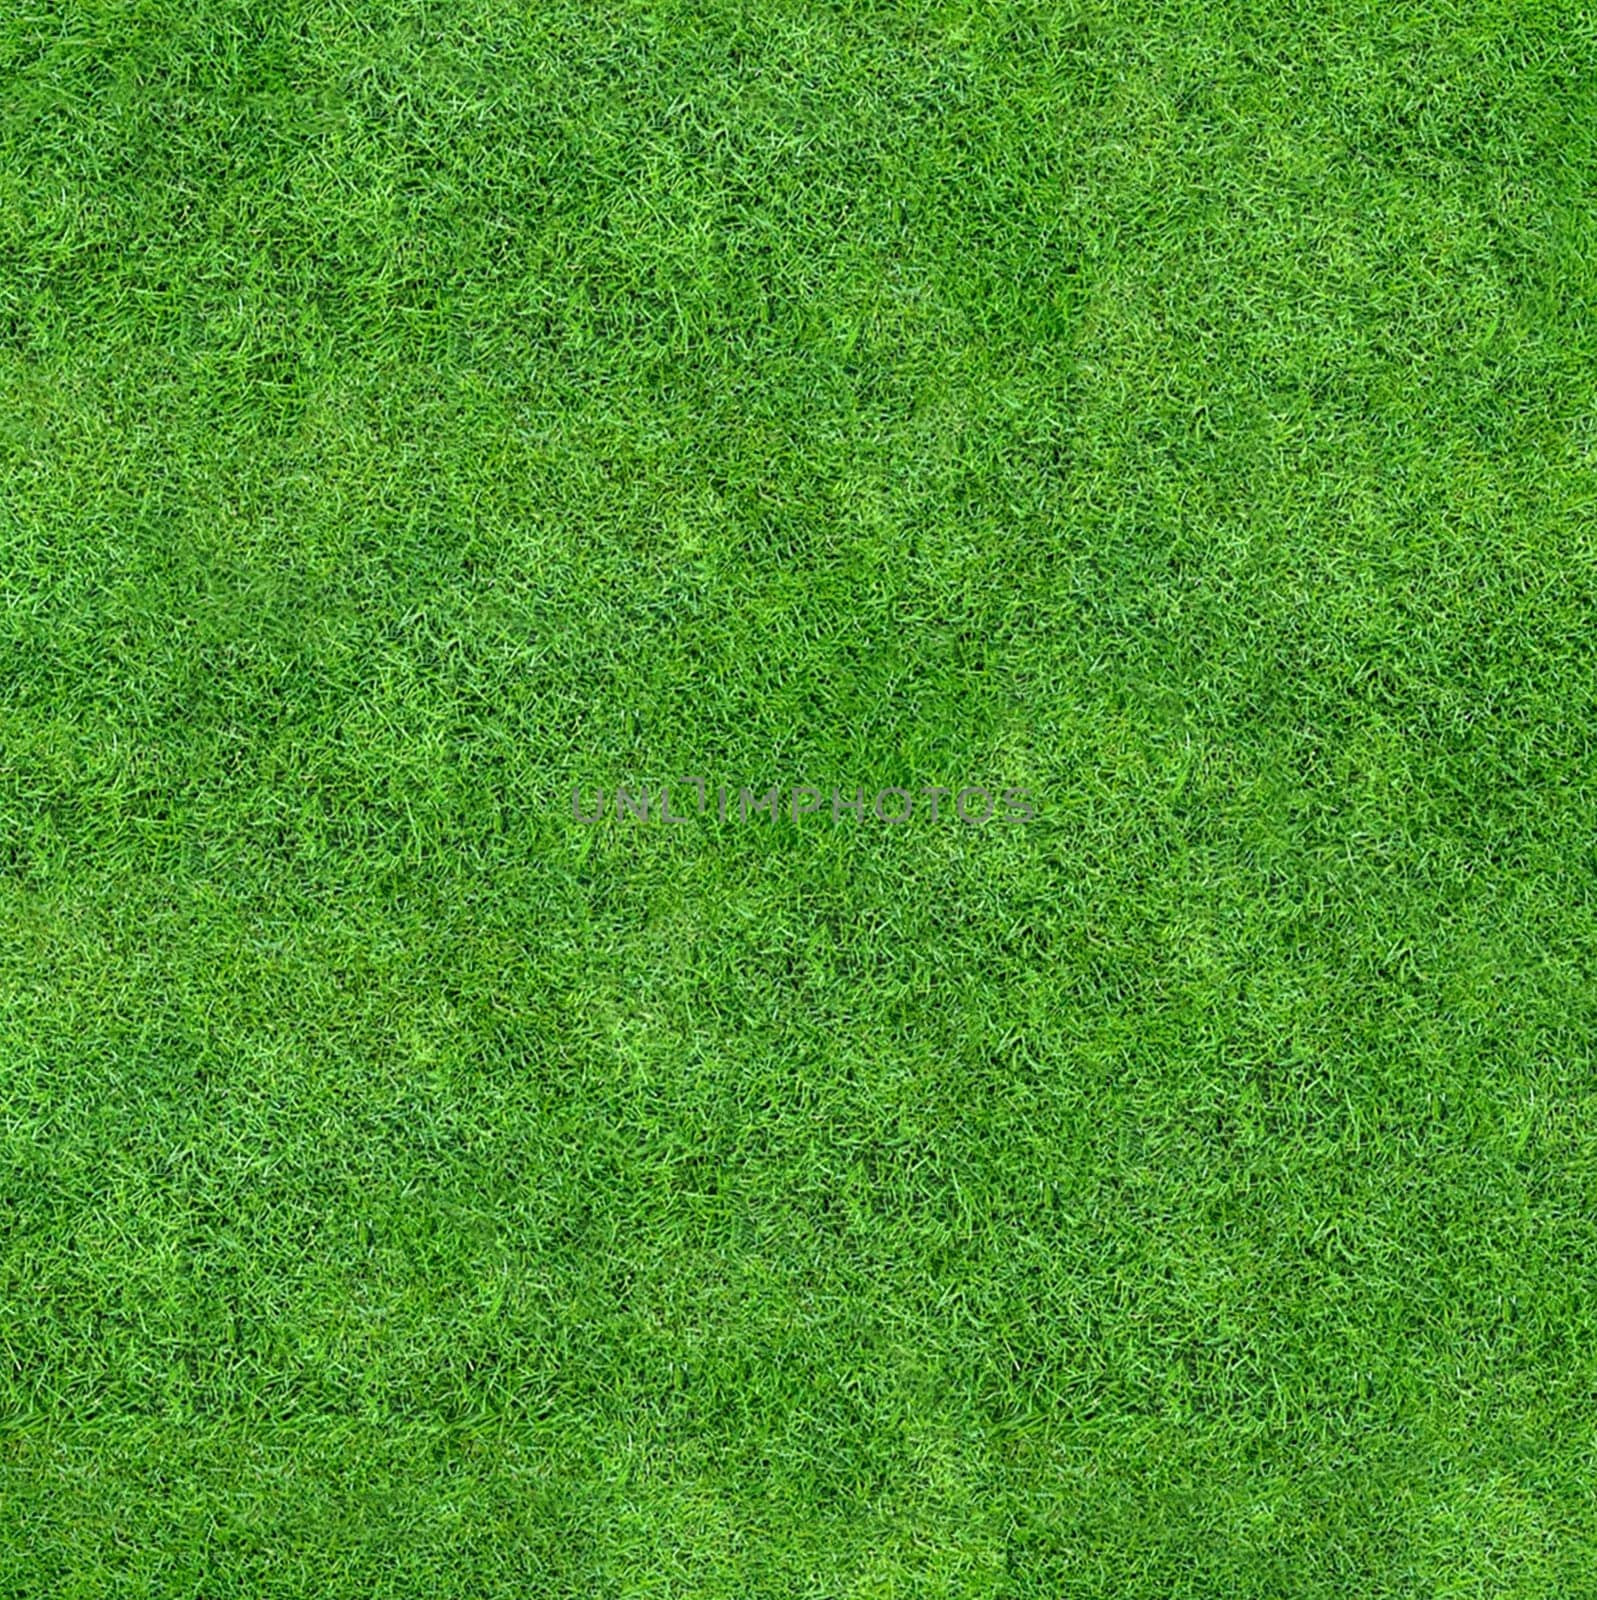 Background texture of short-cropped green grass close-up by Mastak80